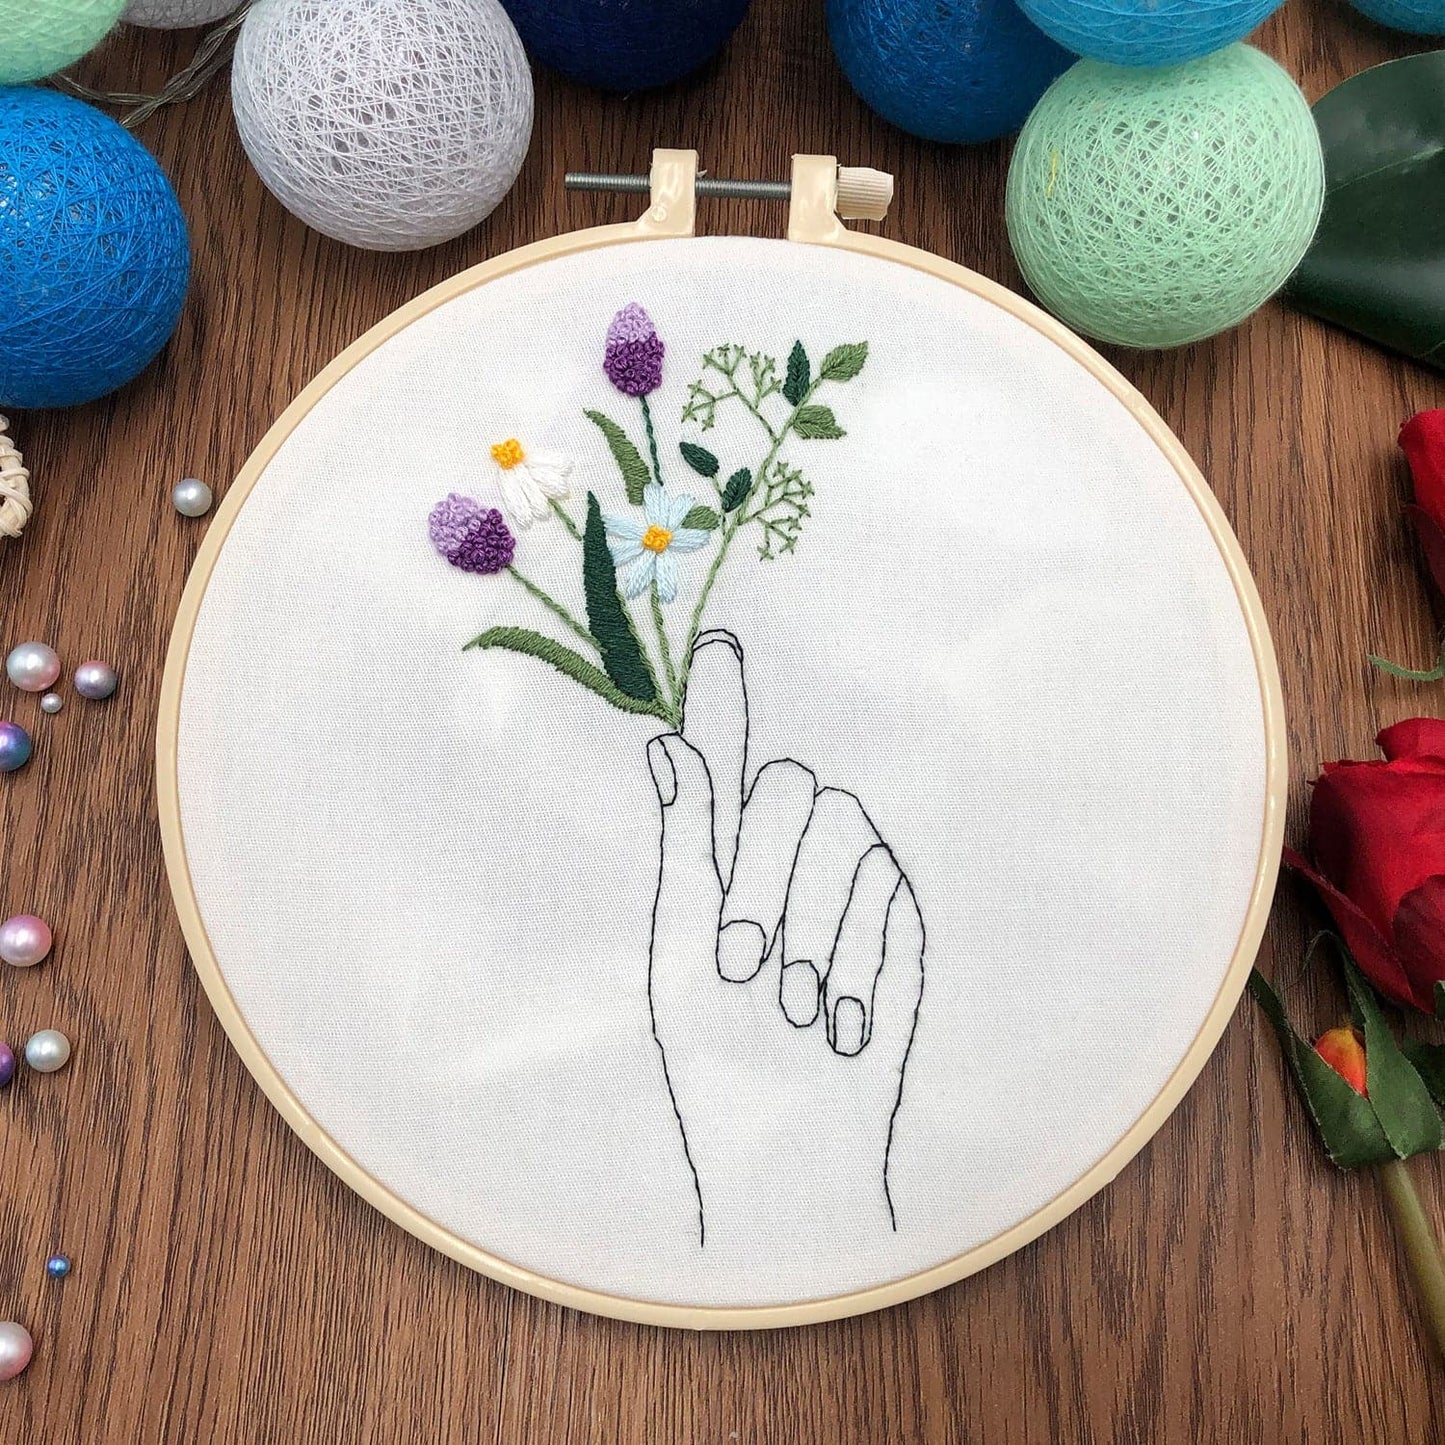 "The hand that holds the flower" - embroidery ktclubs.com